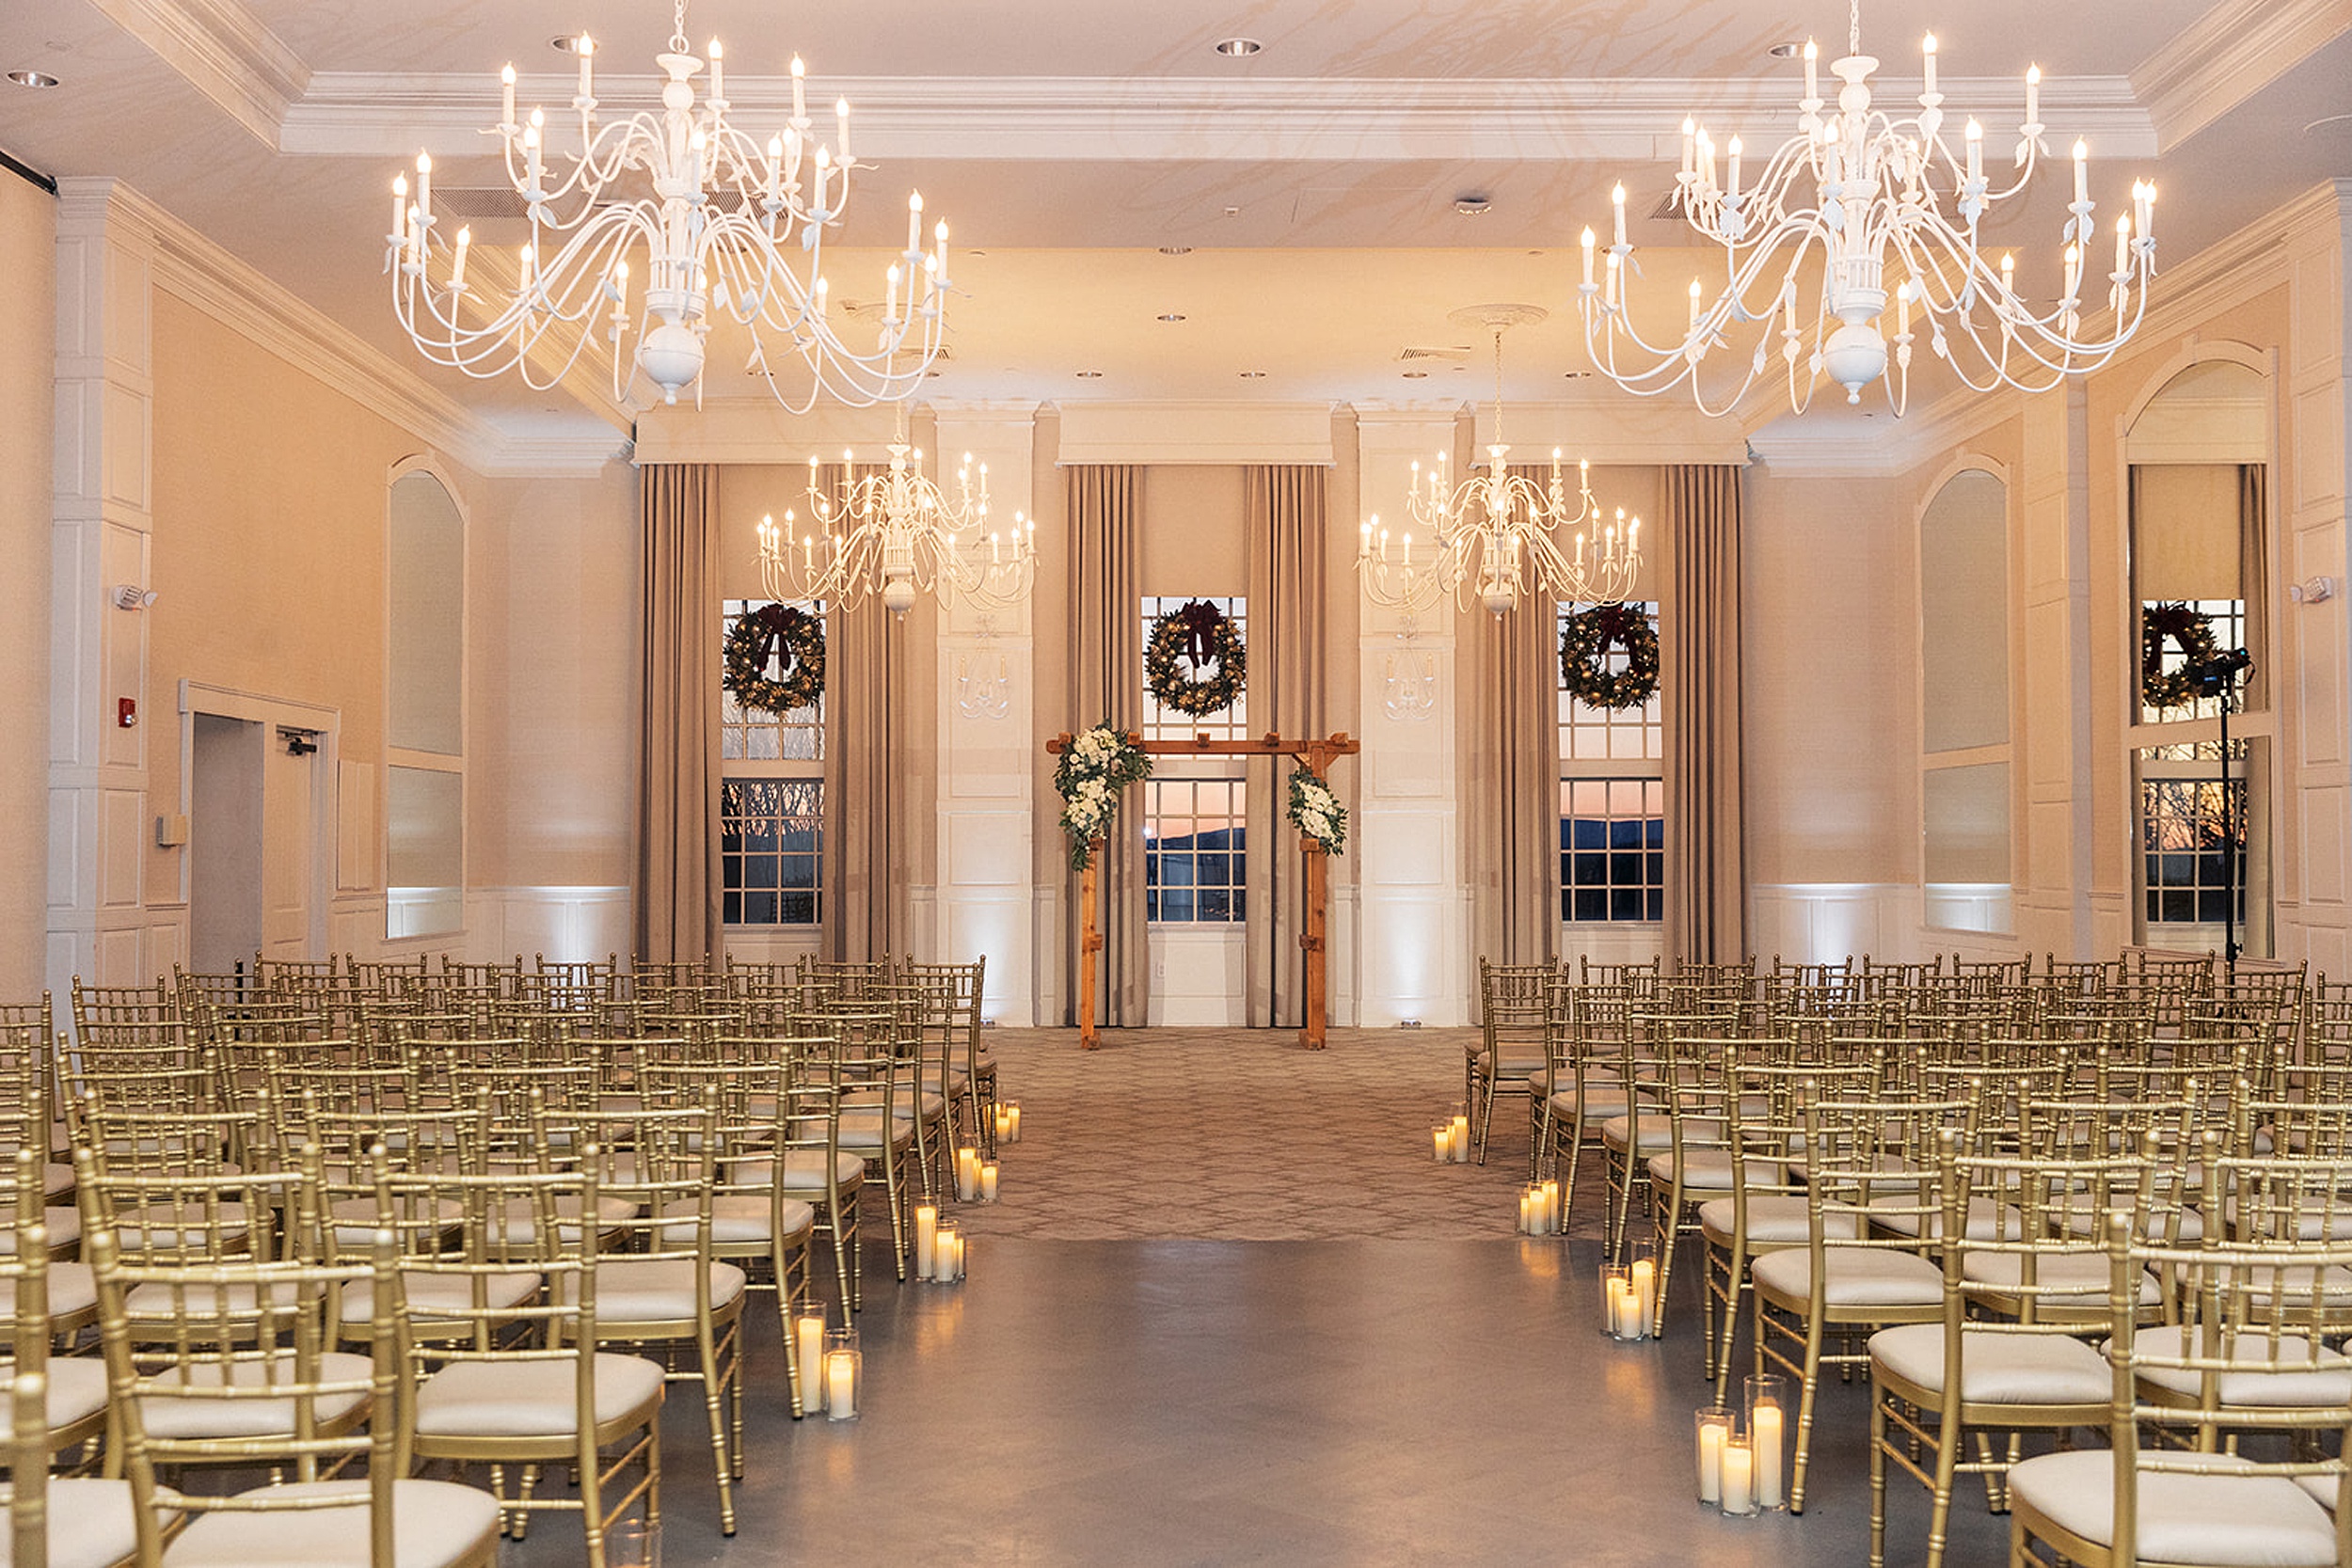 Details of a wedding ceremony setup indoors with gold chairs, candles and chandeliers